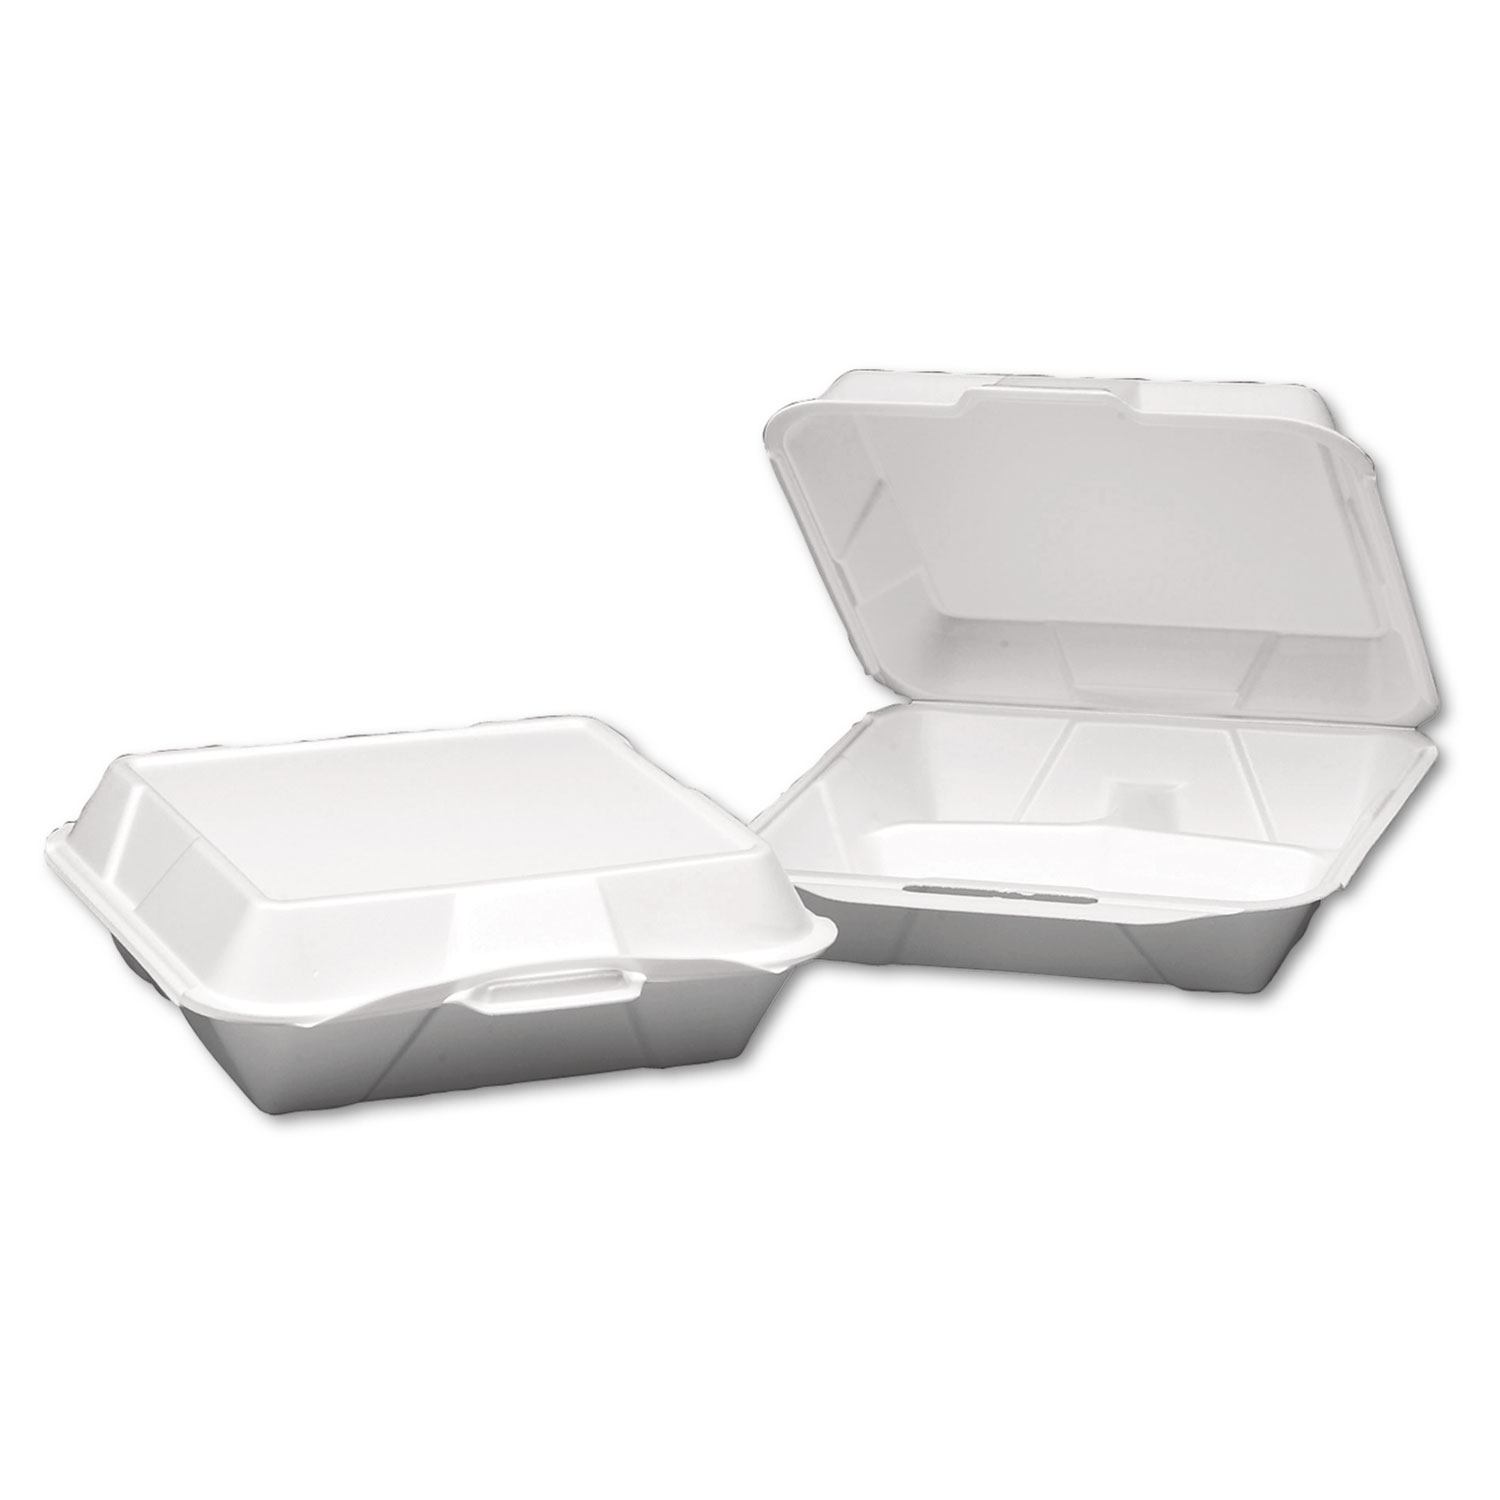  Genpak 25300--- Foam Hinged Container, 3-Compartment, Jumbo, 10-1/4x9-1/4x3-1/4, White, 100/Bag (GNP25300) 